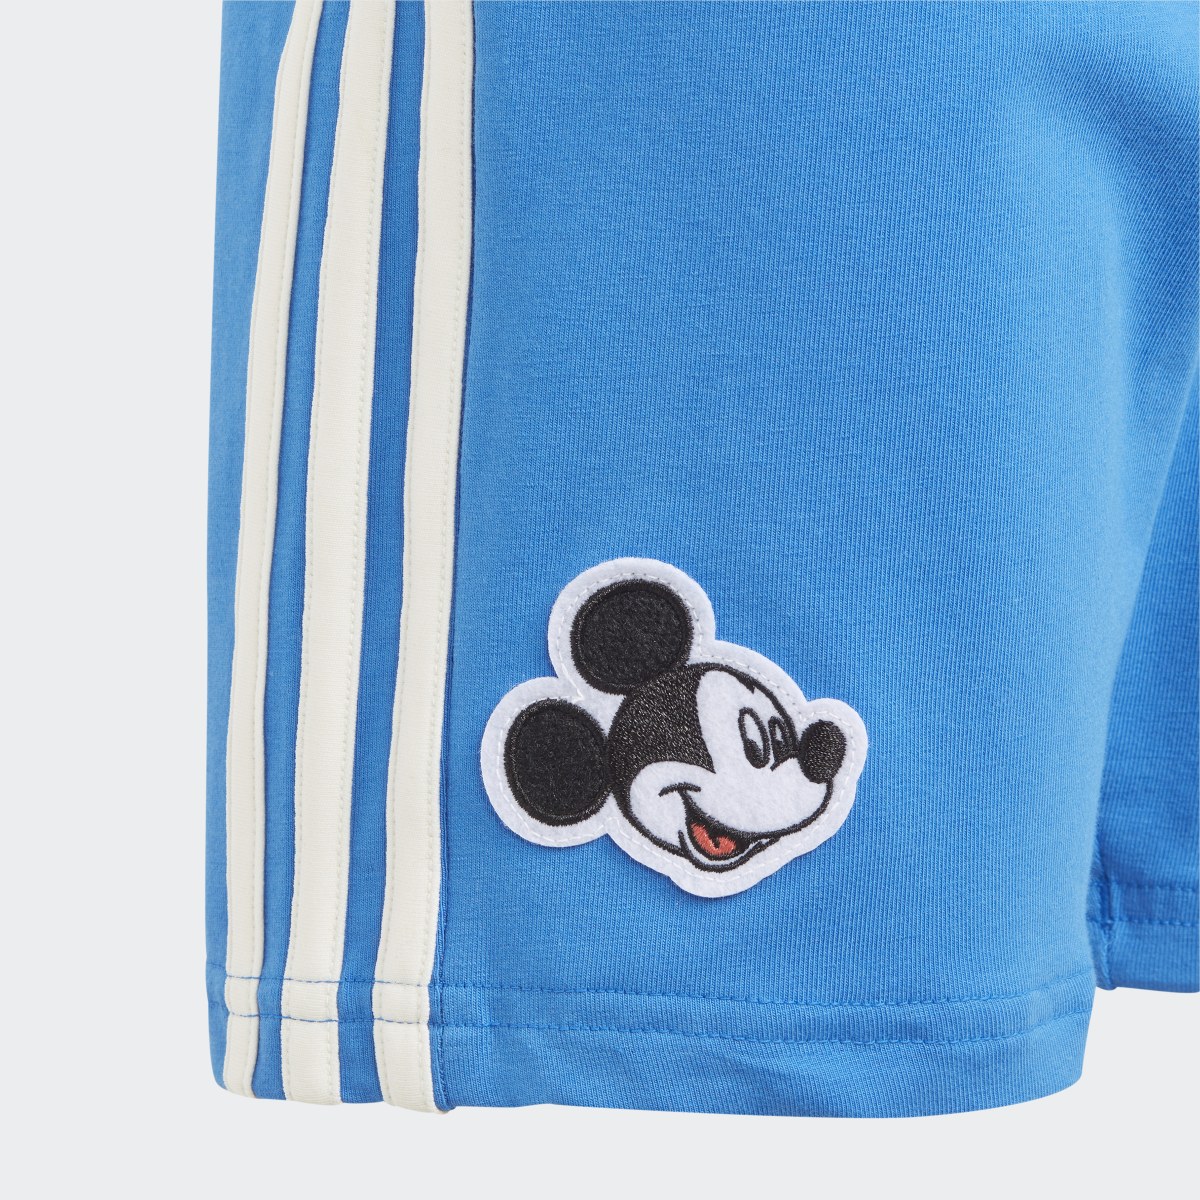 Adidas Completo adidas x Disney Mickey Mouse Tee and Shorts. 8